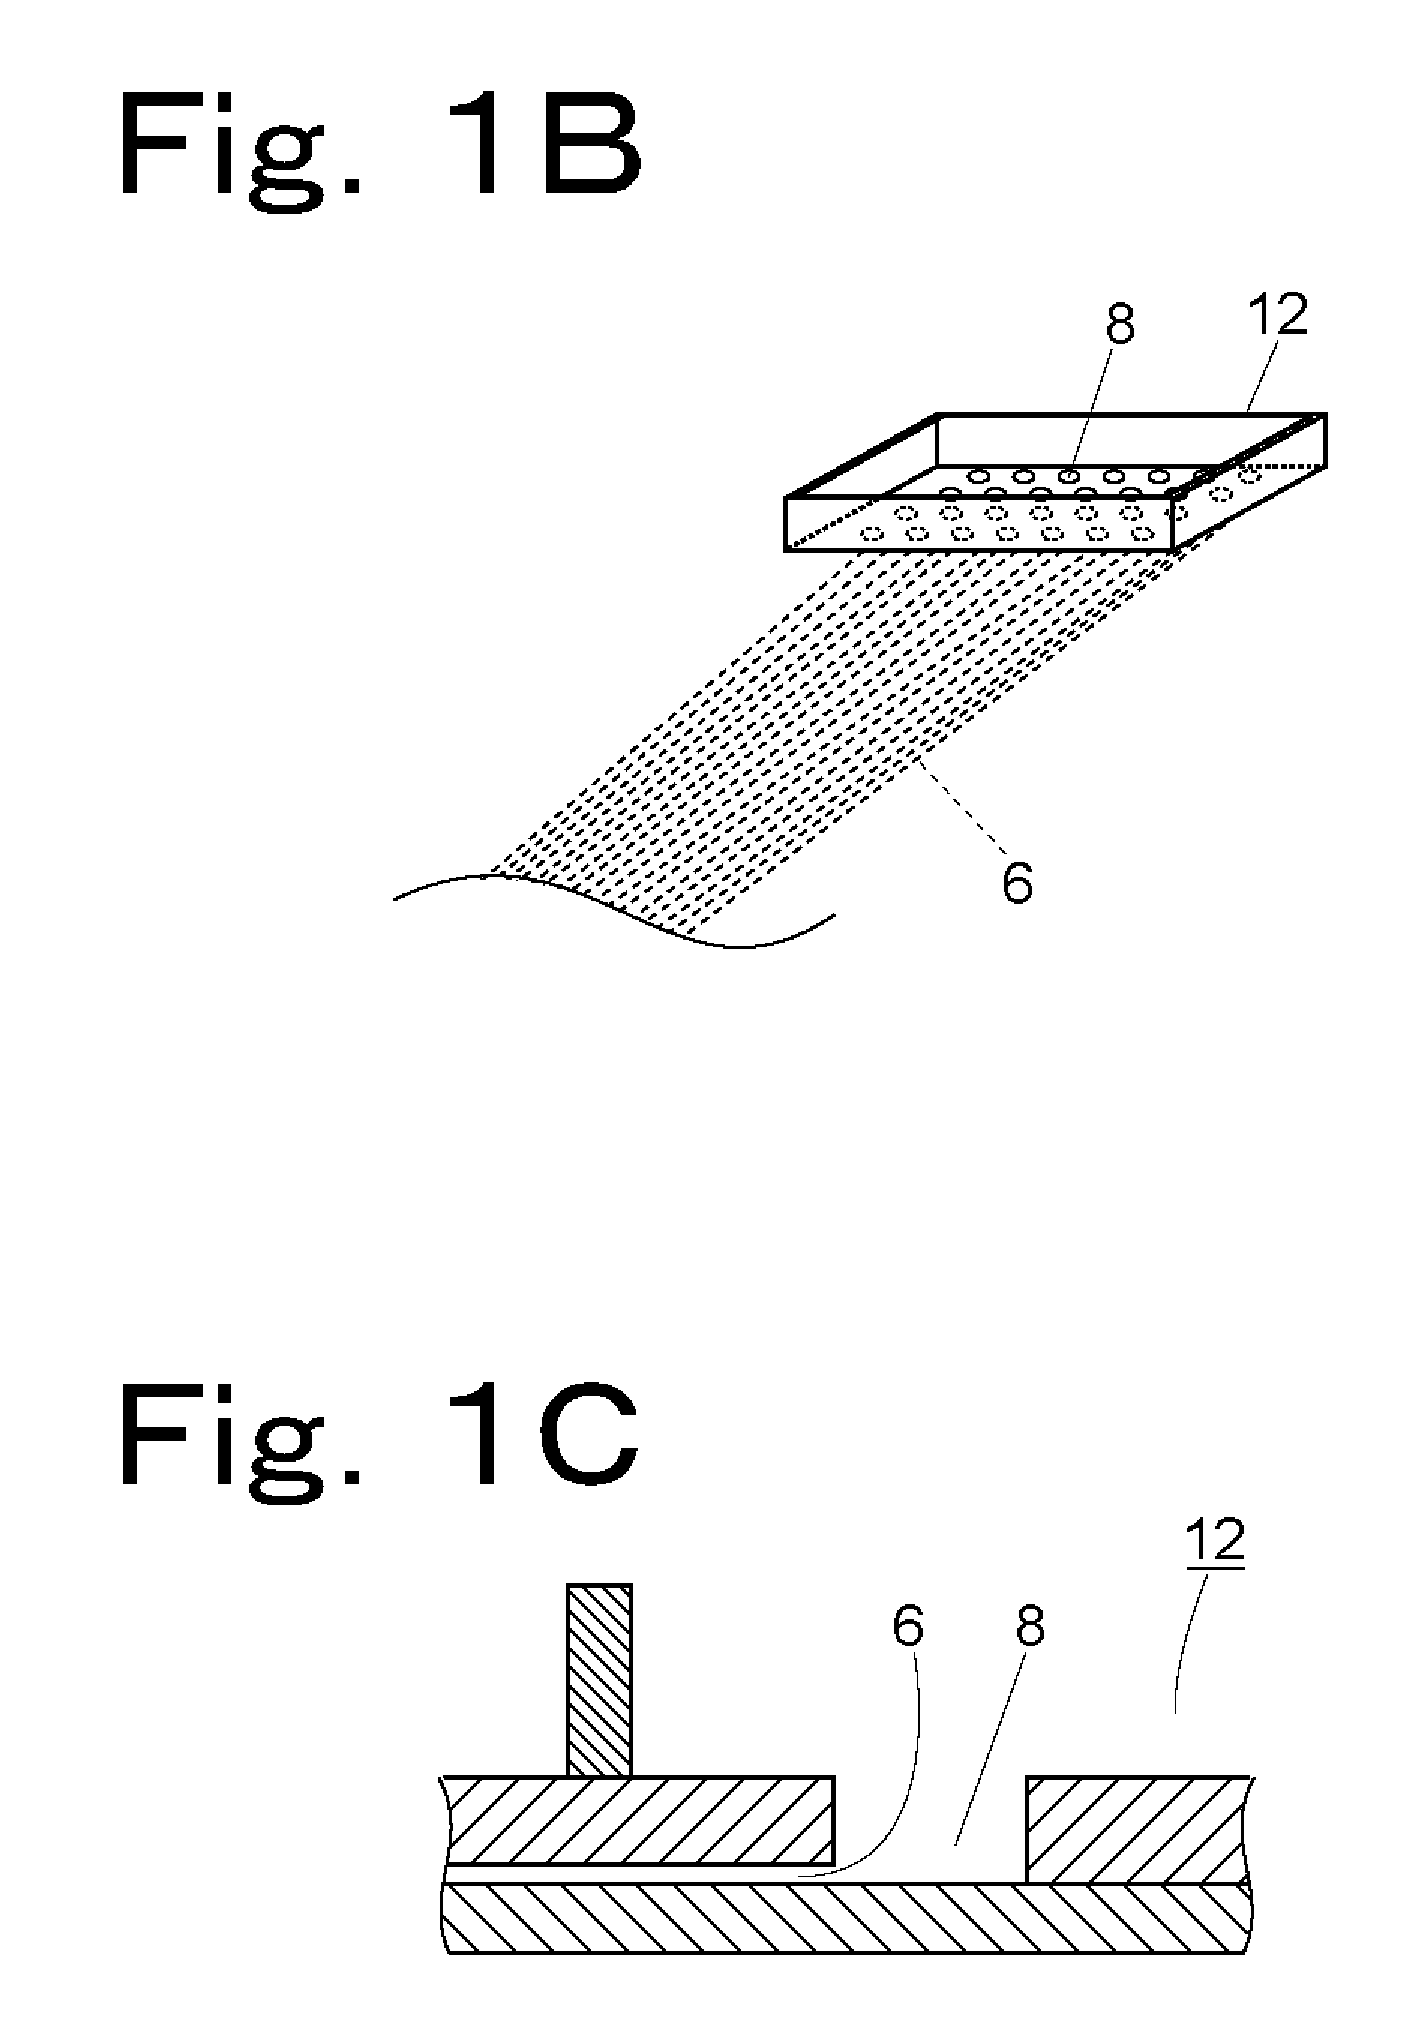 Method for pretreatment of electrophoresis, substrate for analysis, and pretreatment apparatus for electrophoresis